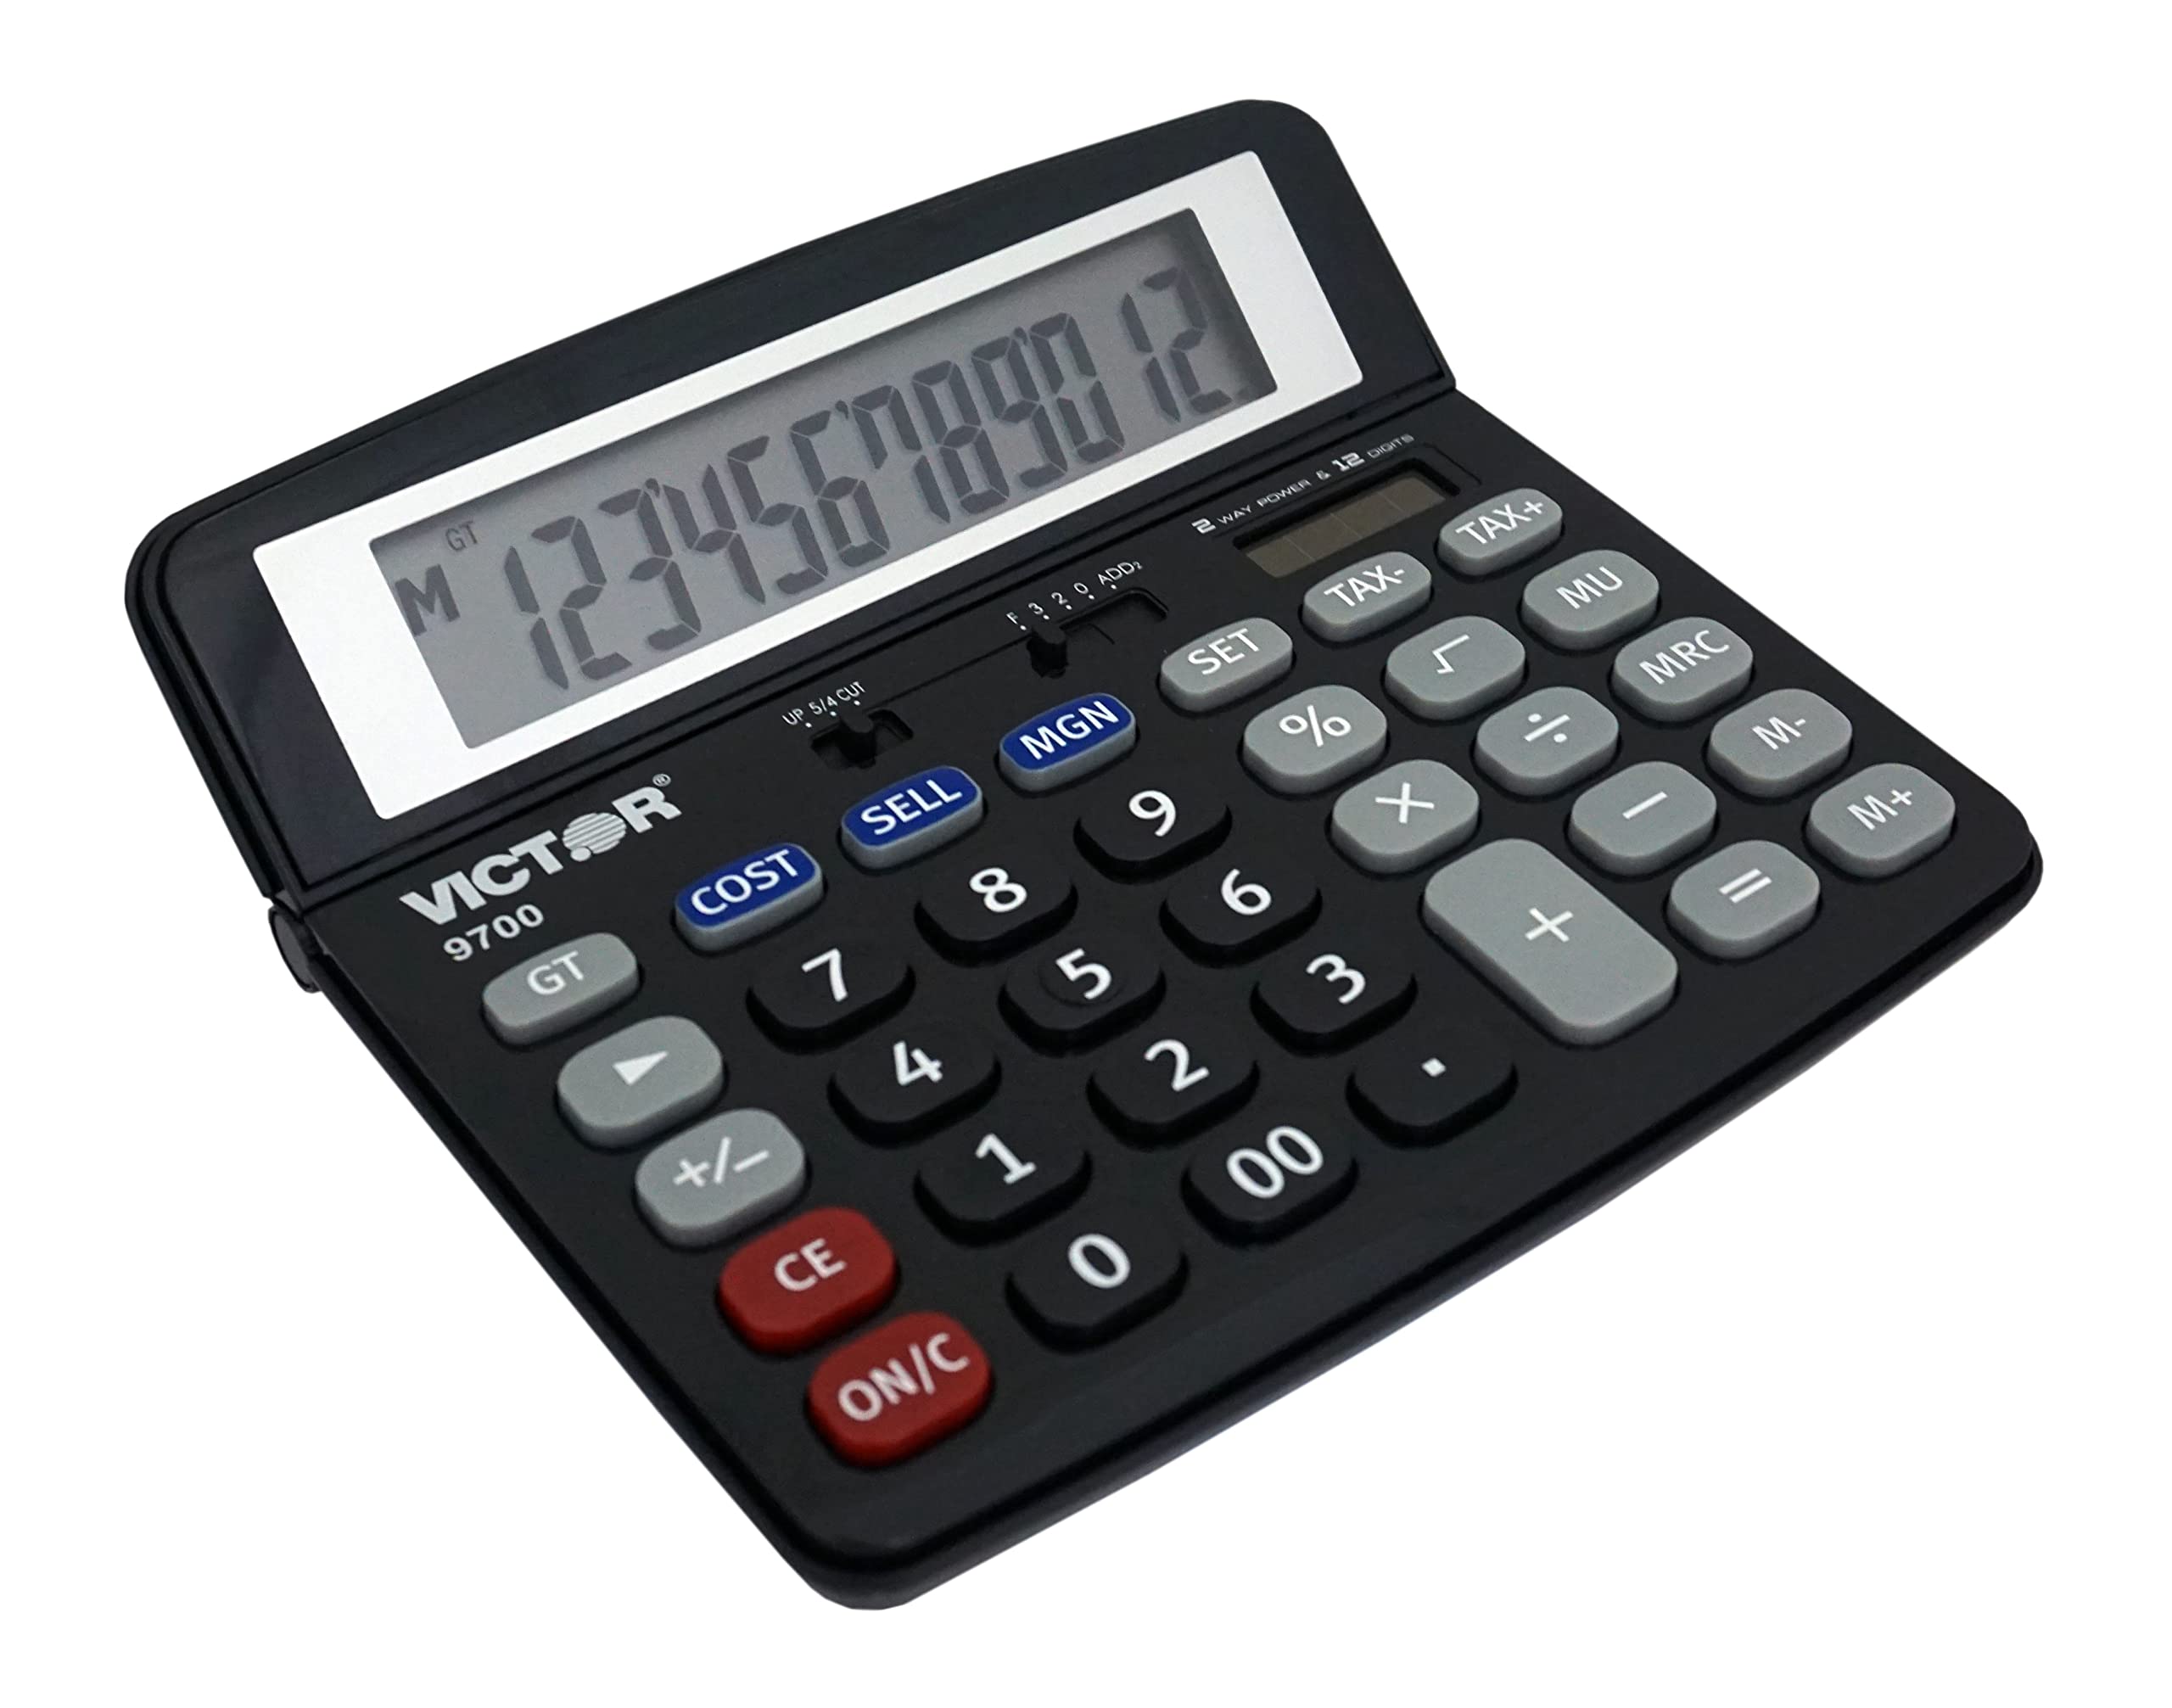 Victor 9700 12-Digit Standard Function Business Calculator, Battery and Solar Hybrid Powered Tilt LCD Display, Great for Home and Office Use, Black